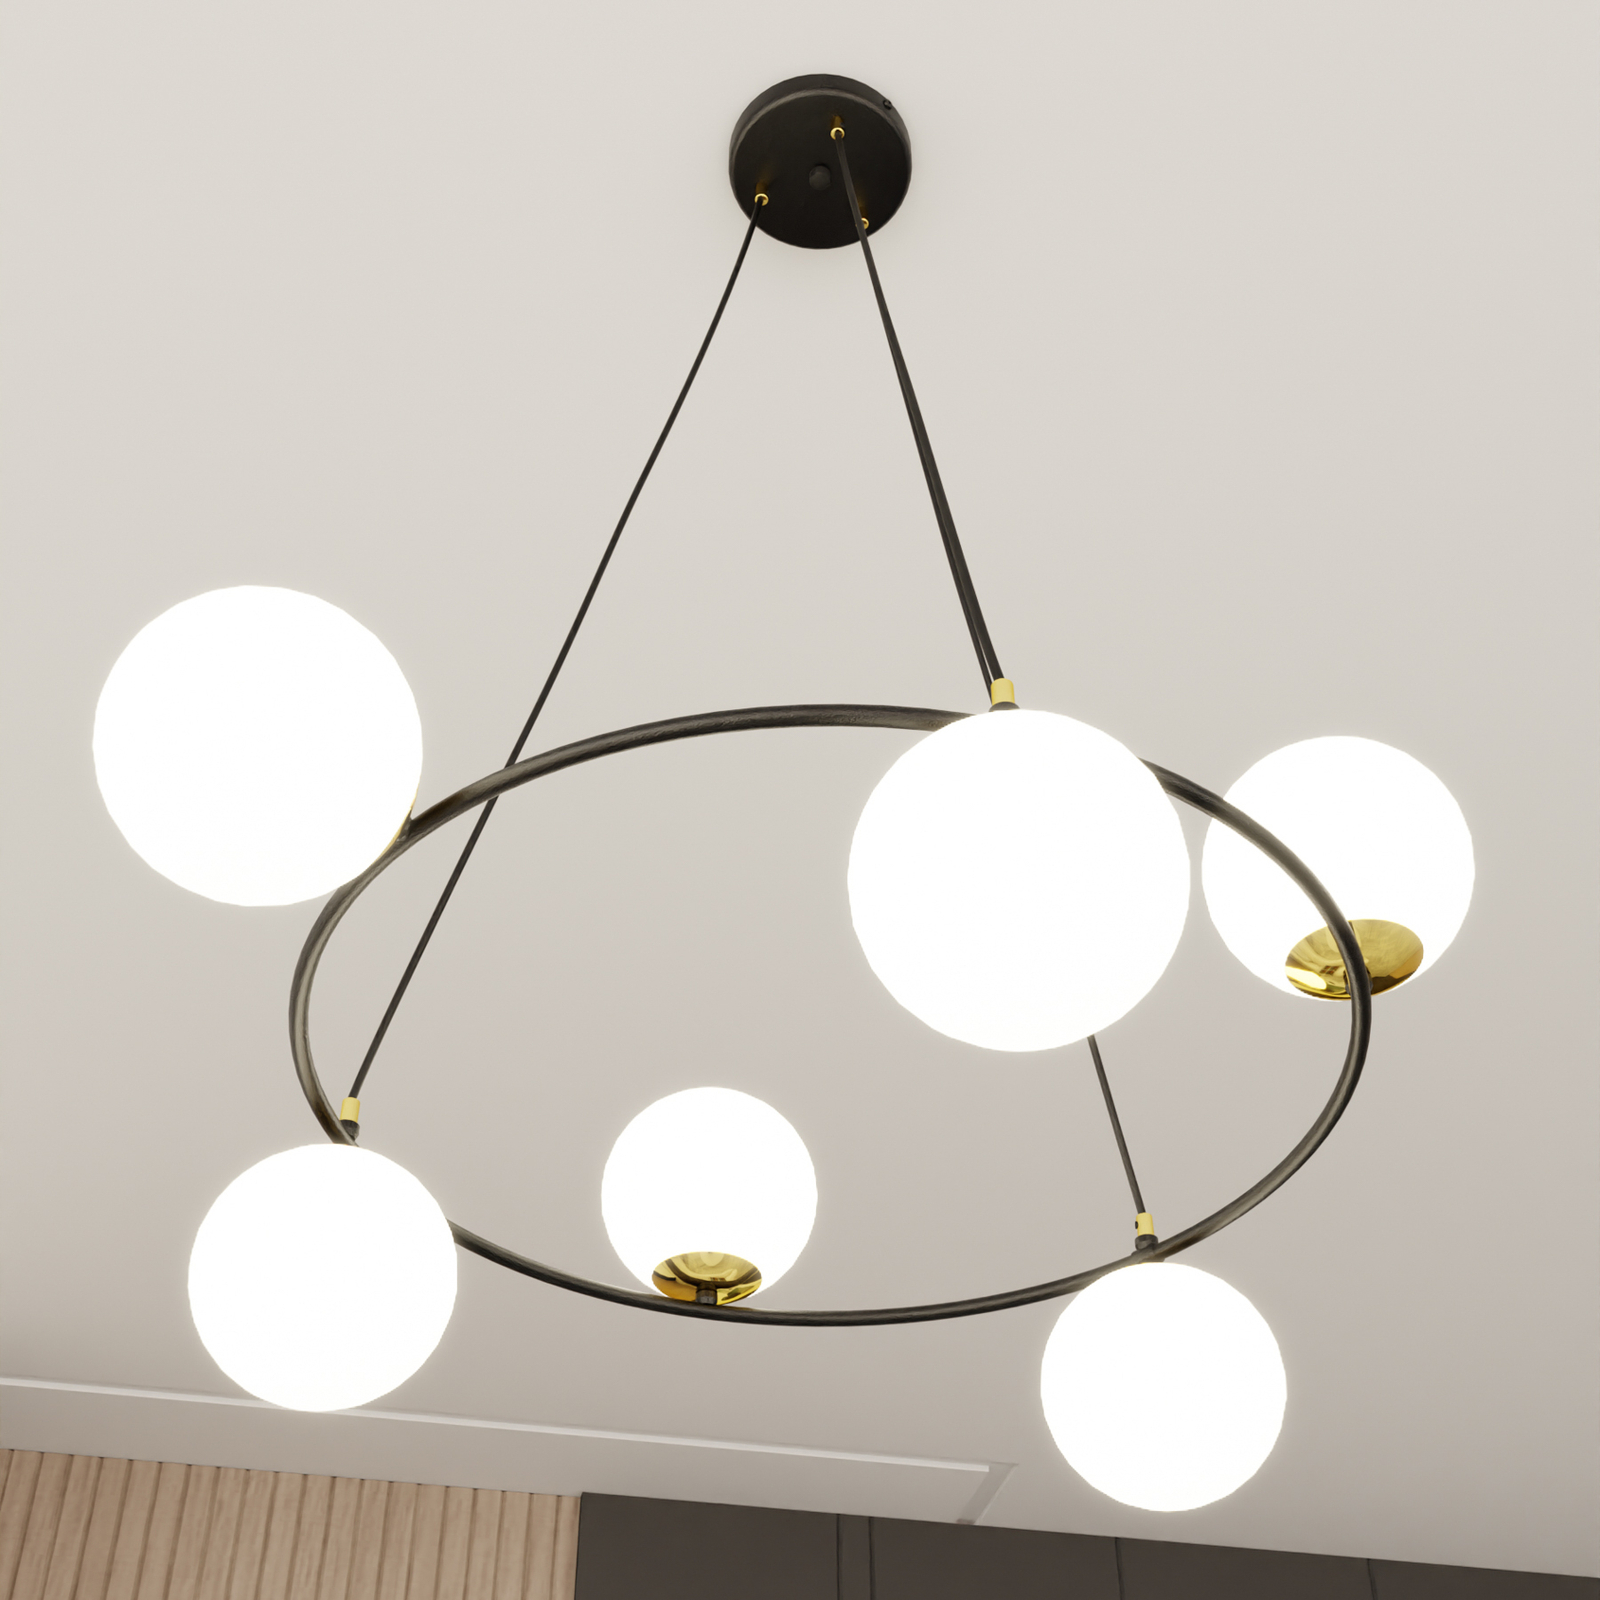 Glassy hanglamp 6-lamps, rond, opaal glas